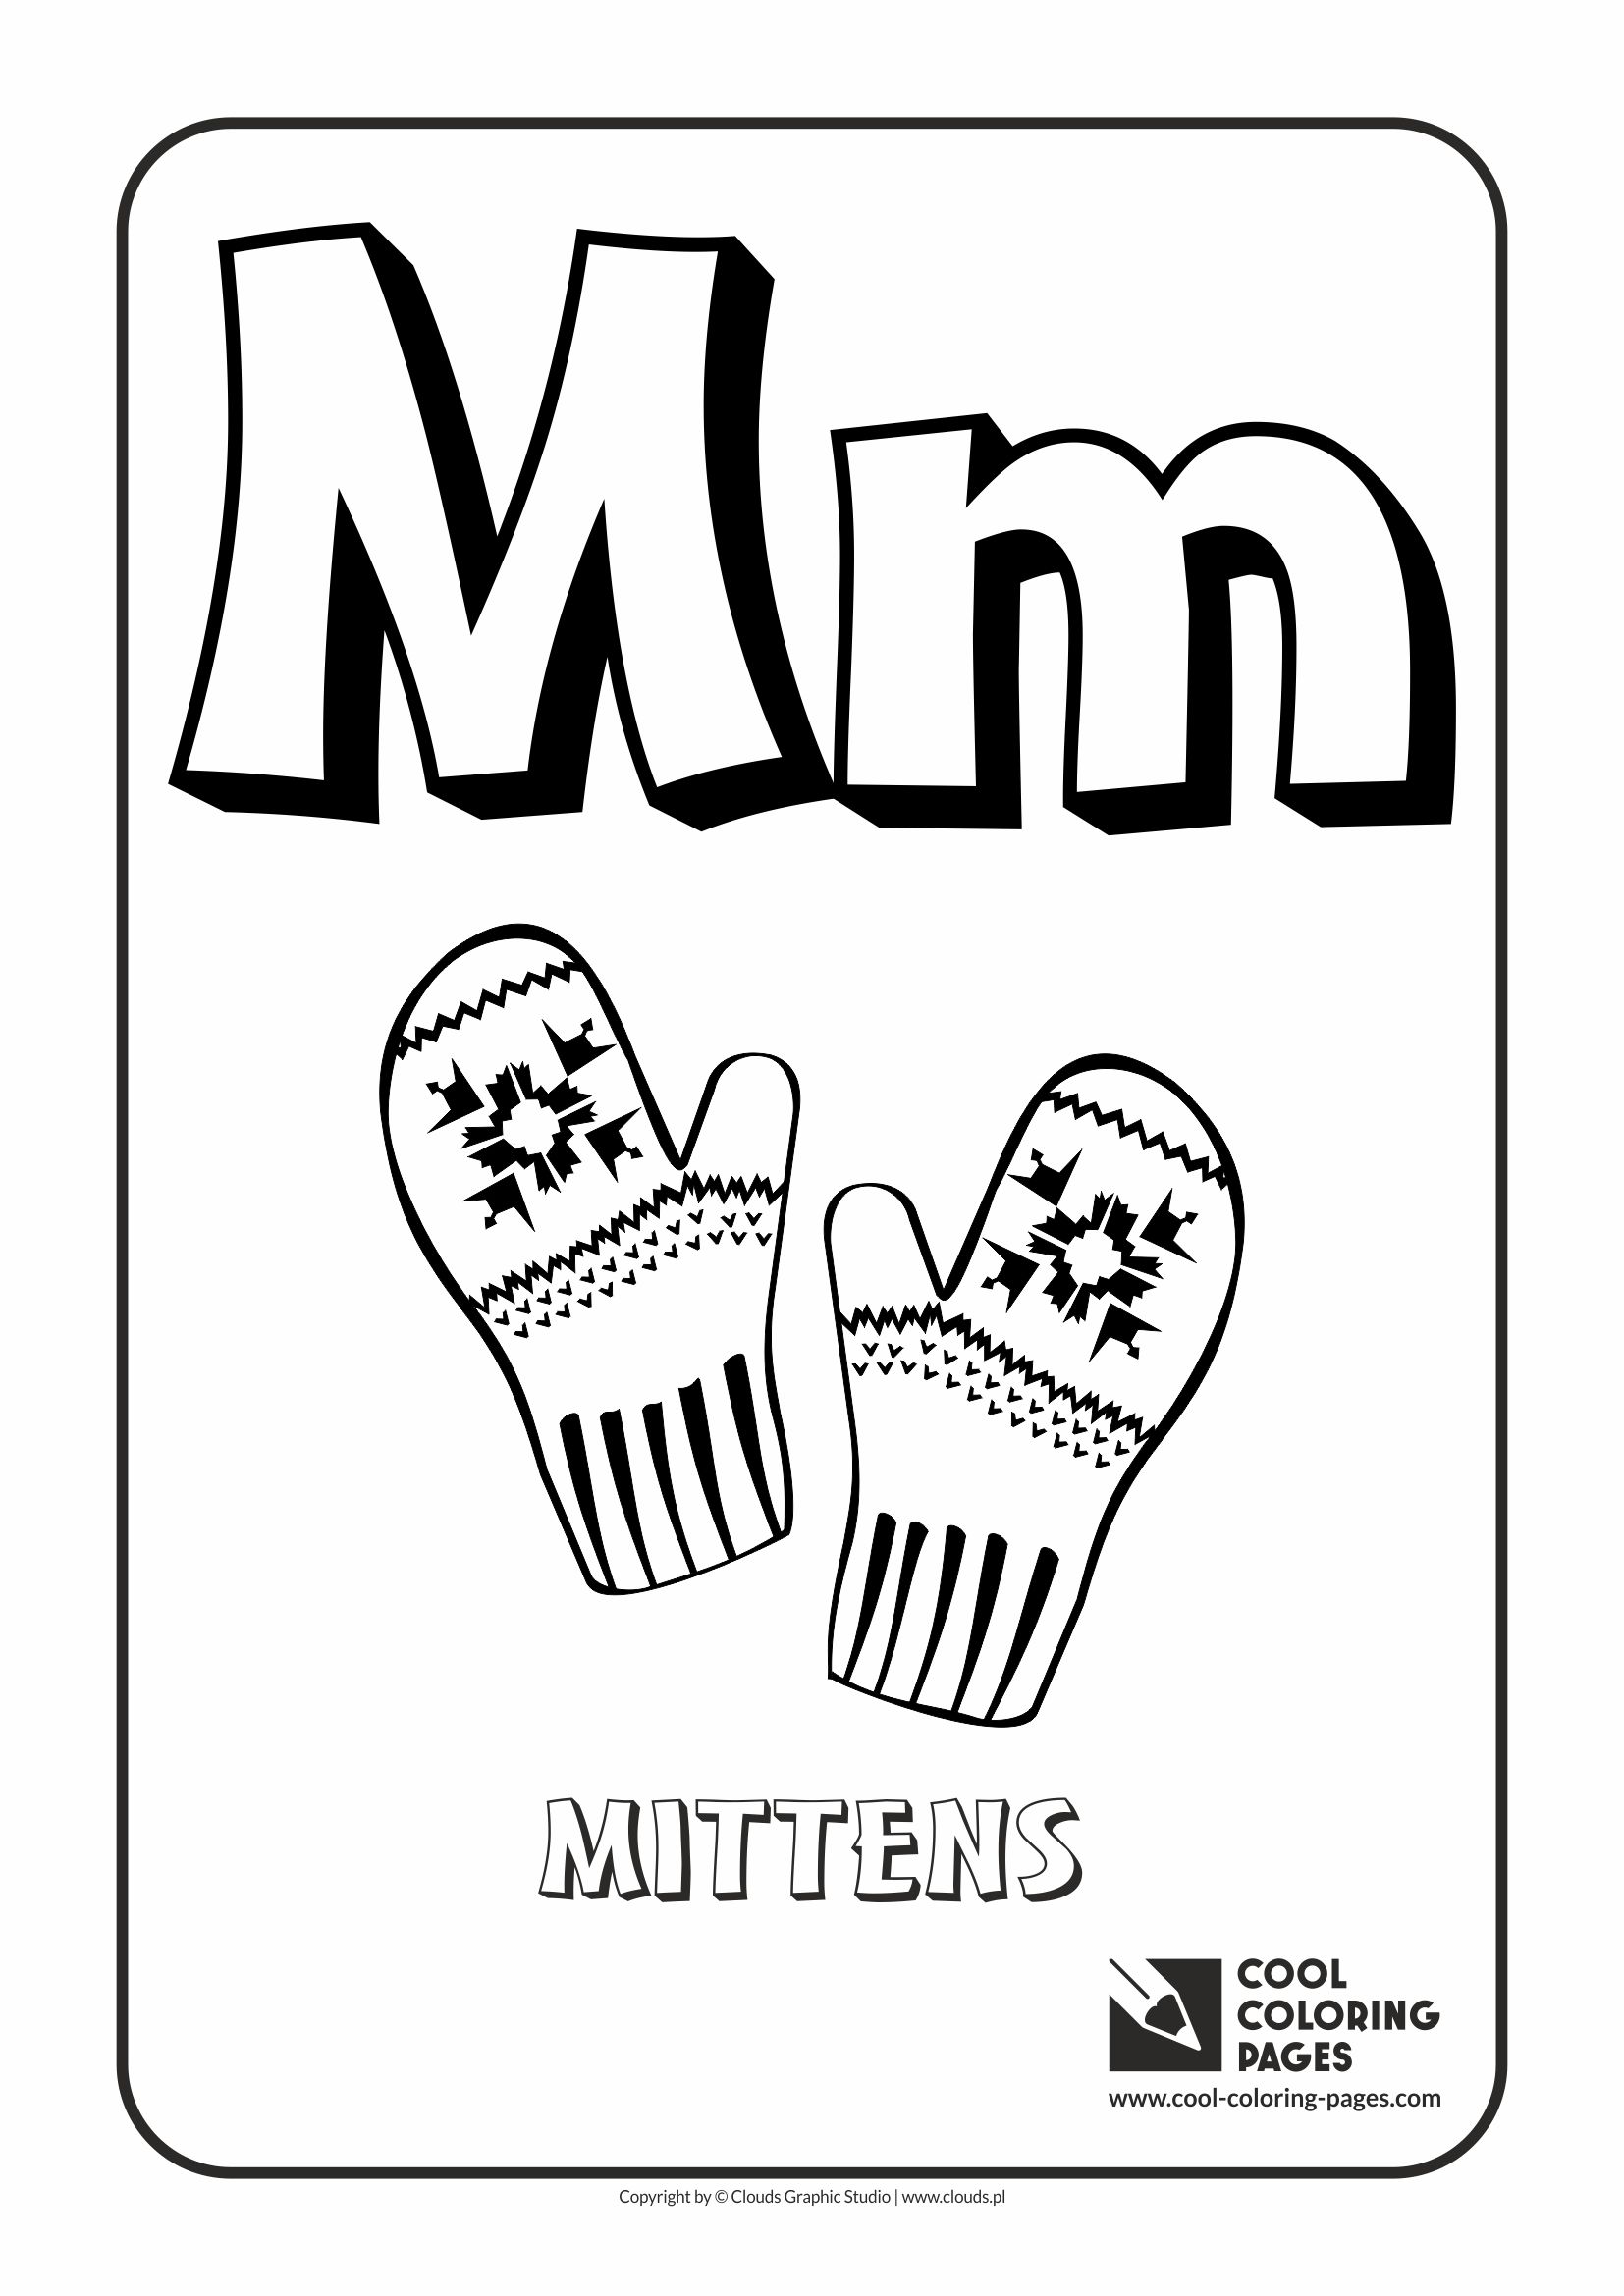 Cool Coloring Pages - Alphabet / Letter M / Coloring page with letter M